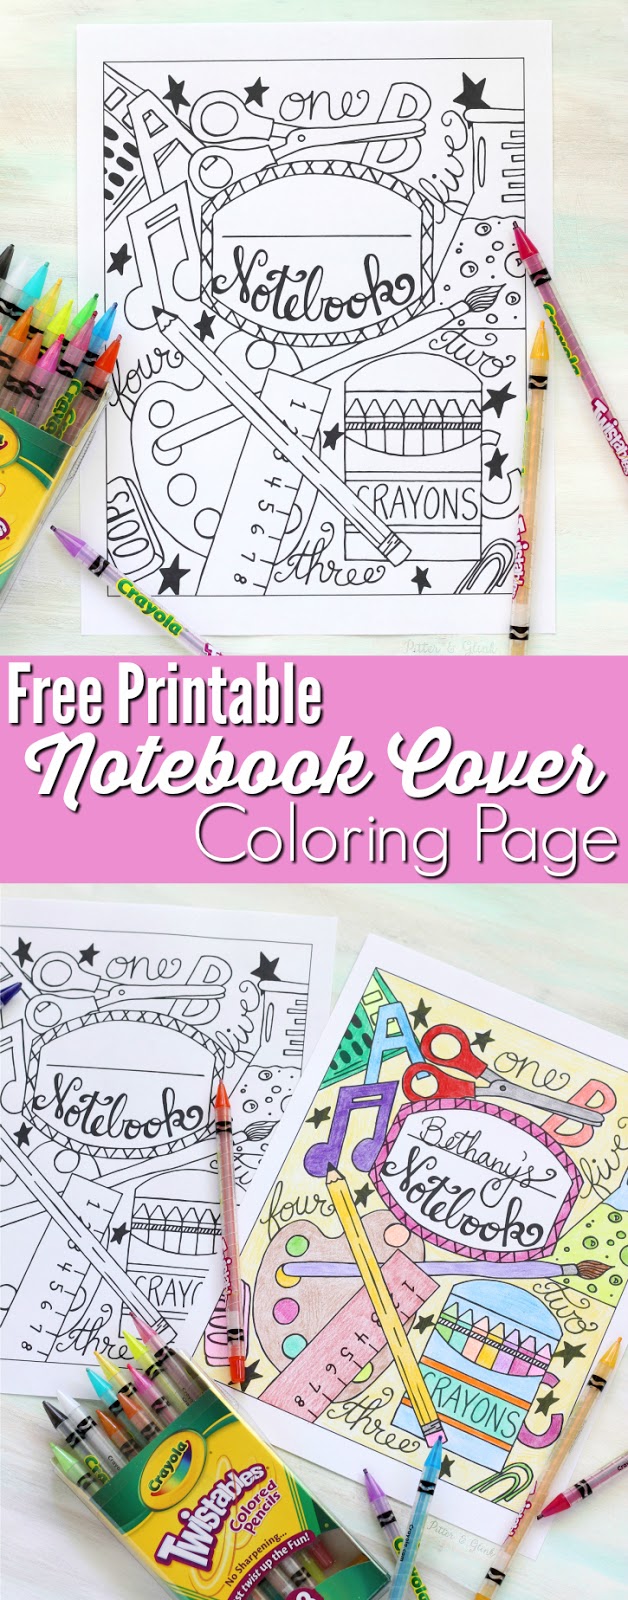 Download Back to School Notebook Cover Printable Coloring Page ...